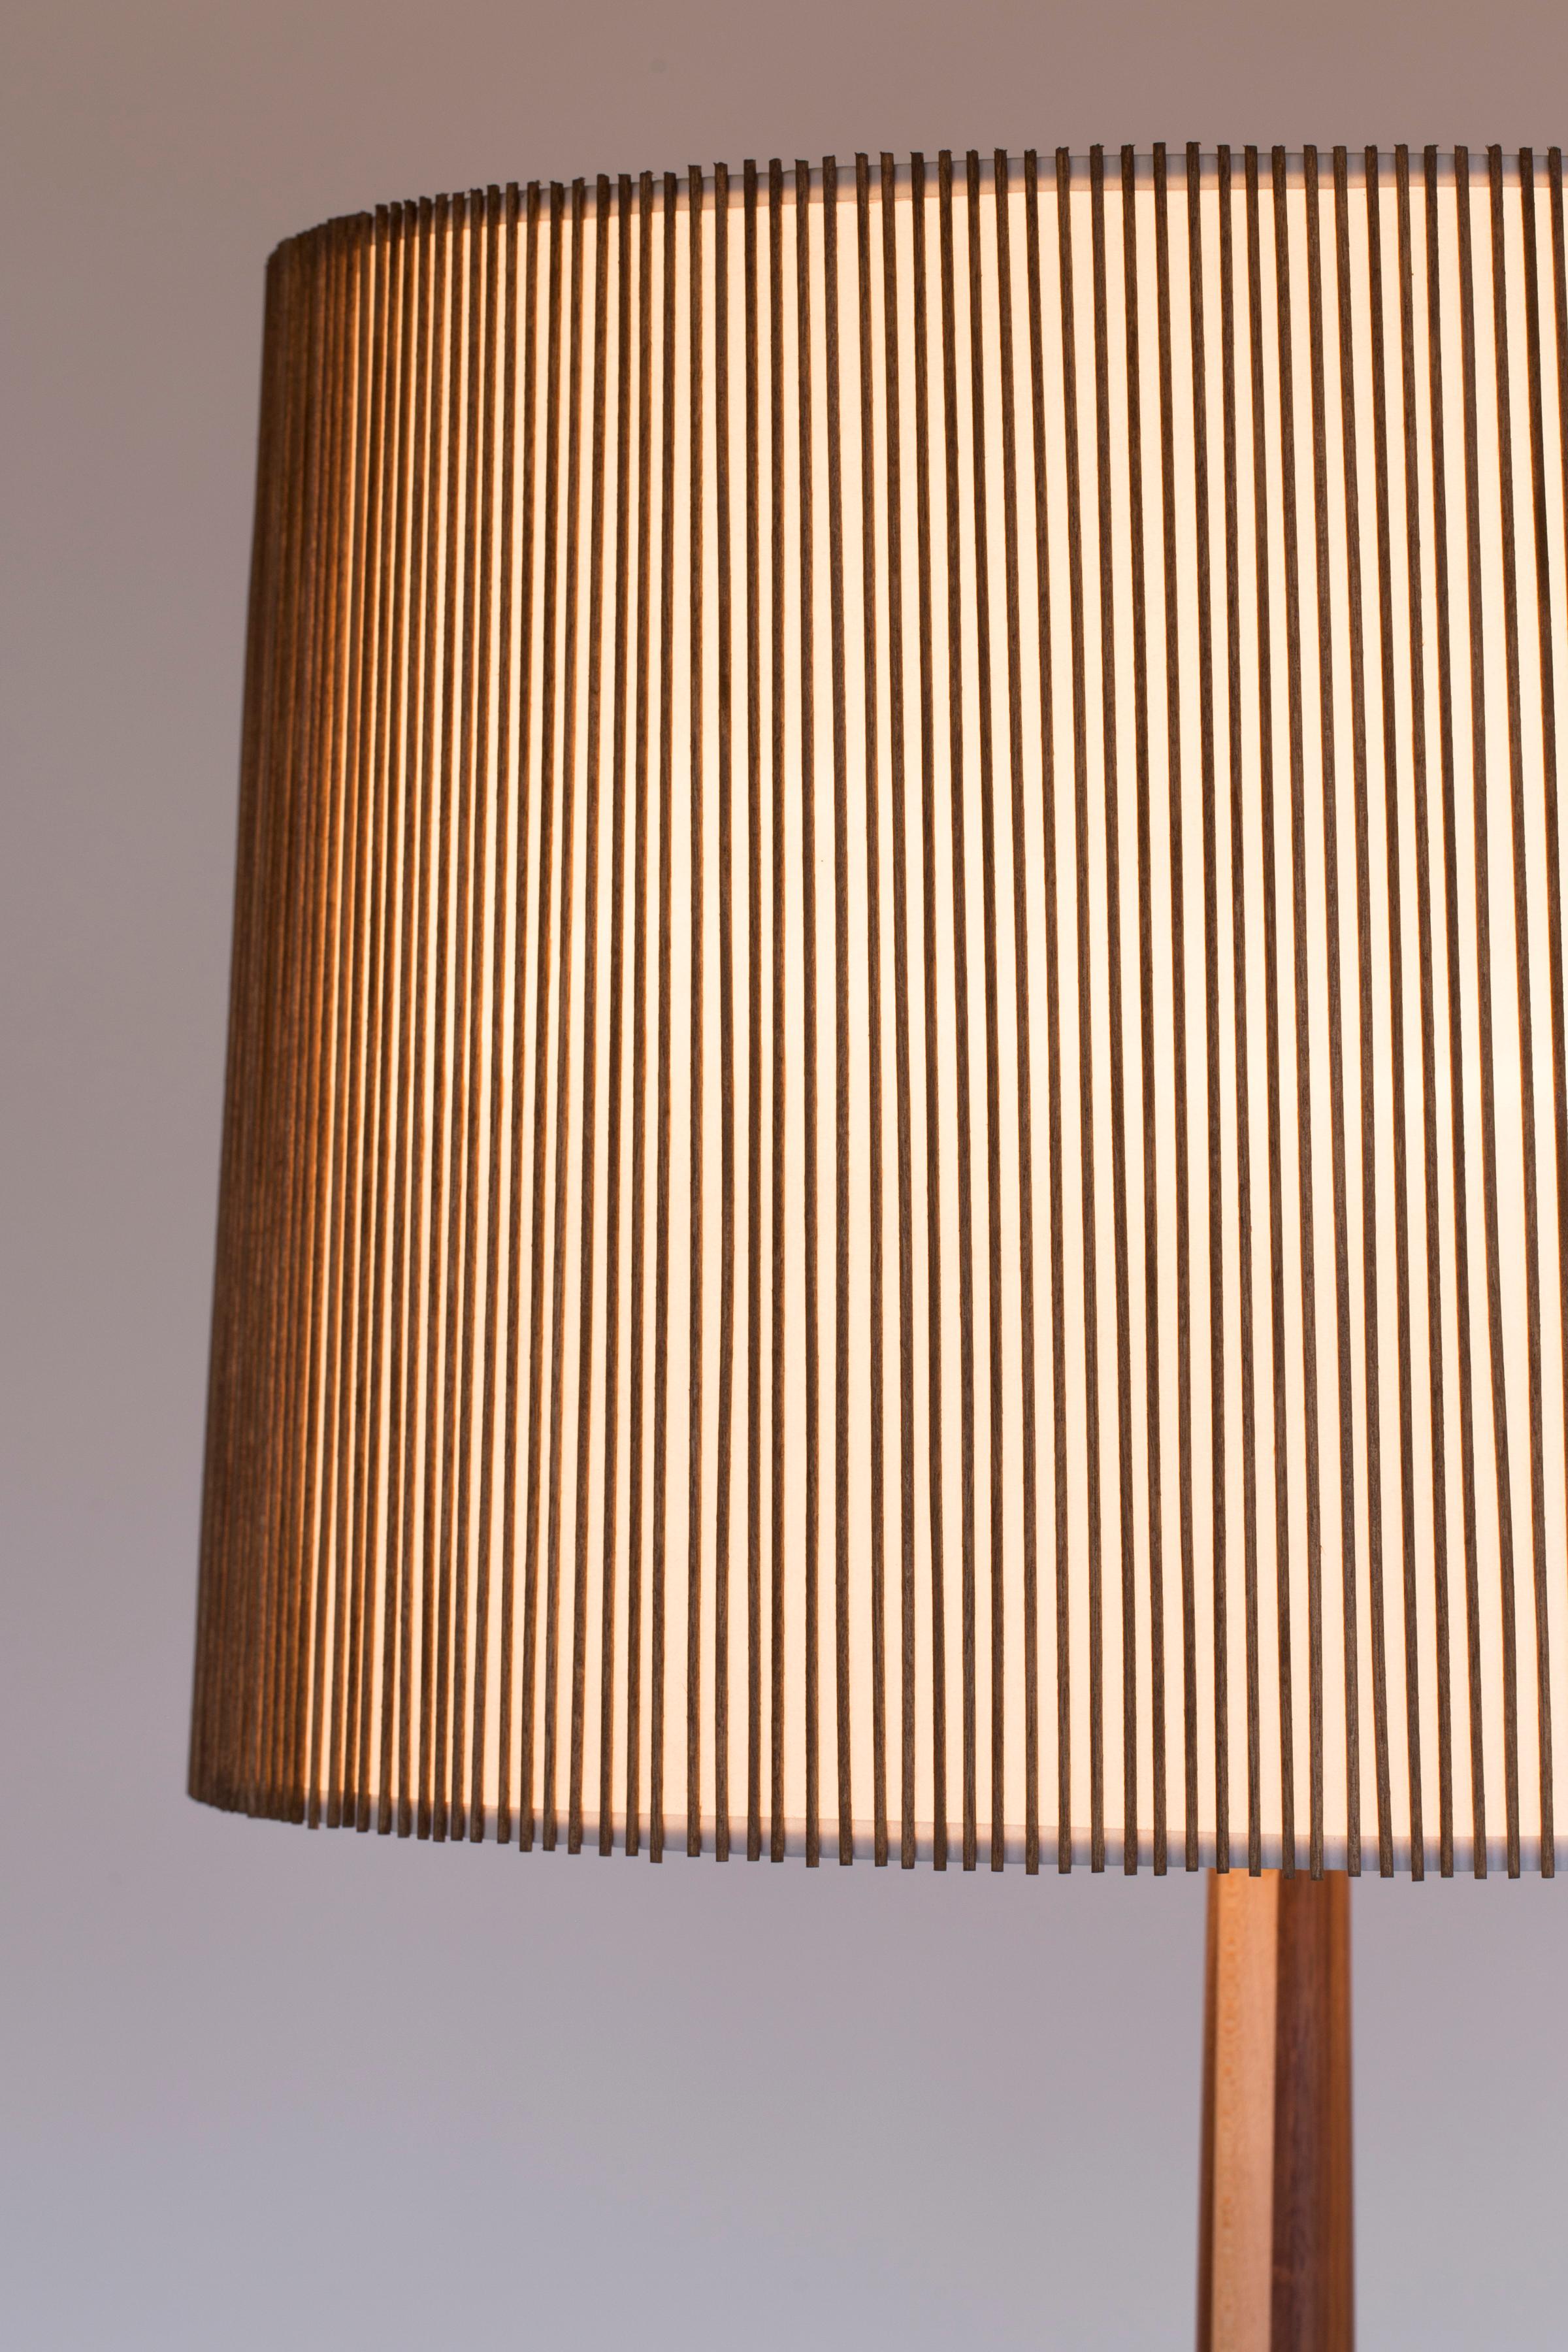 American Walnut and Birch Standing Floor Lamp by Mel Smilow - wired for the UK For Sale